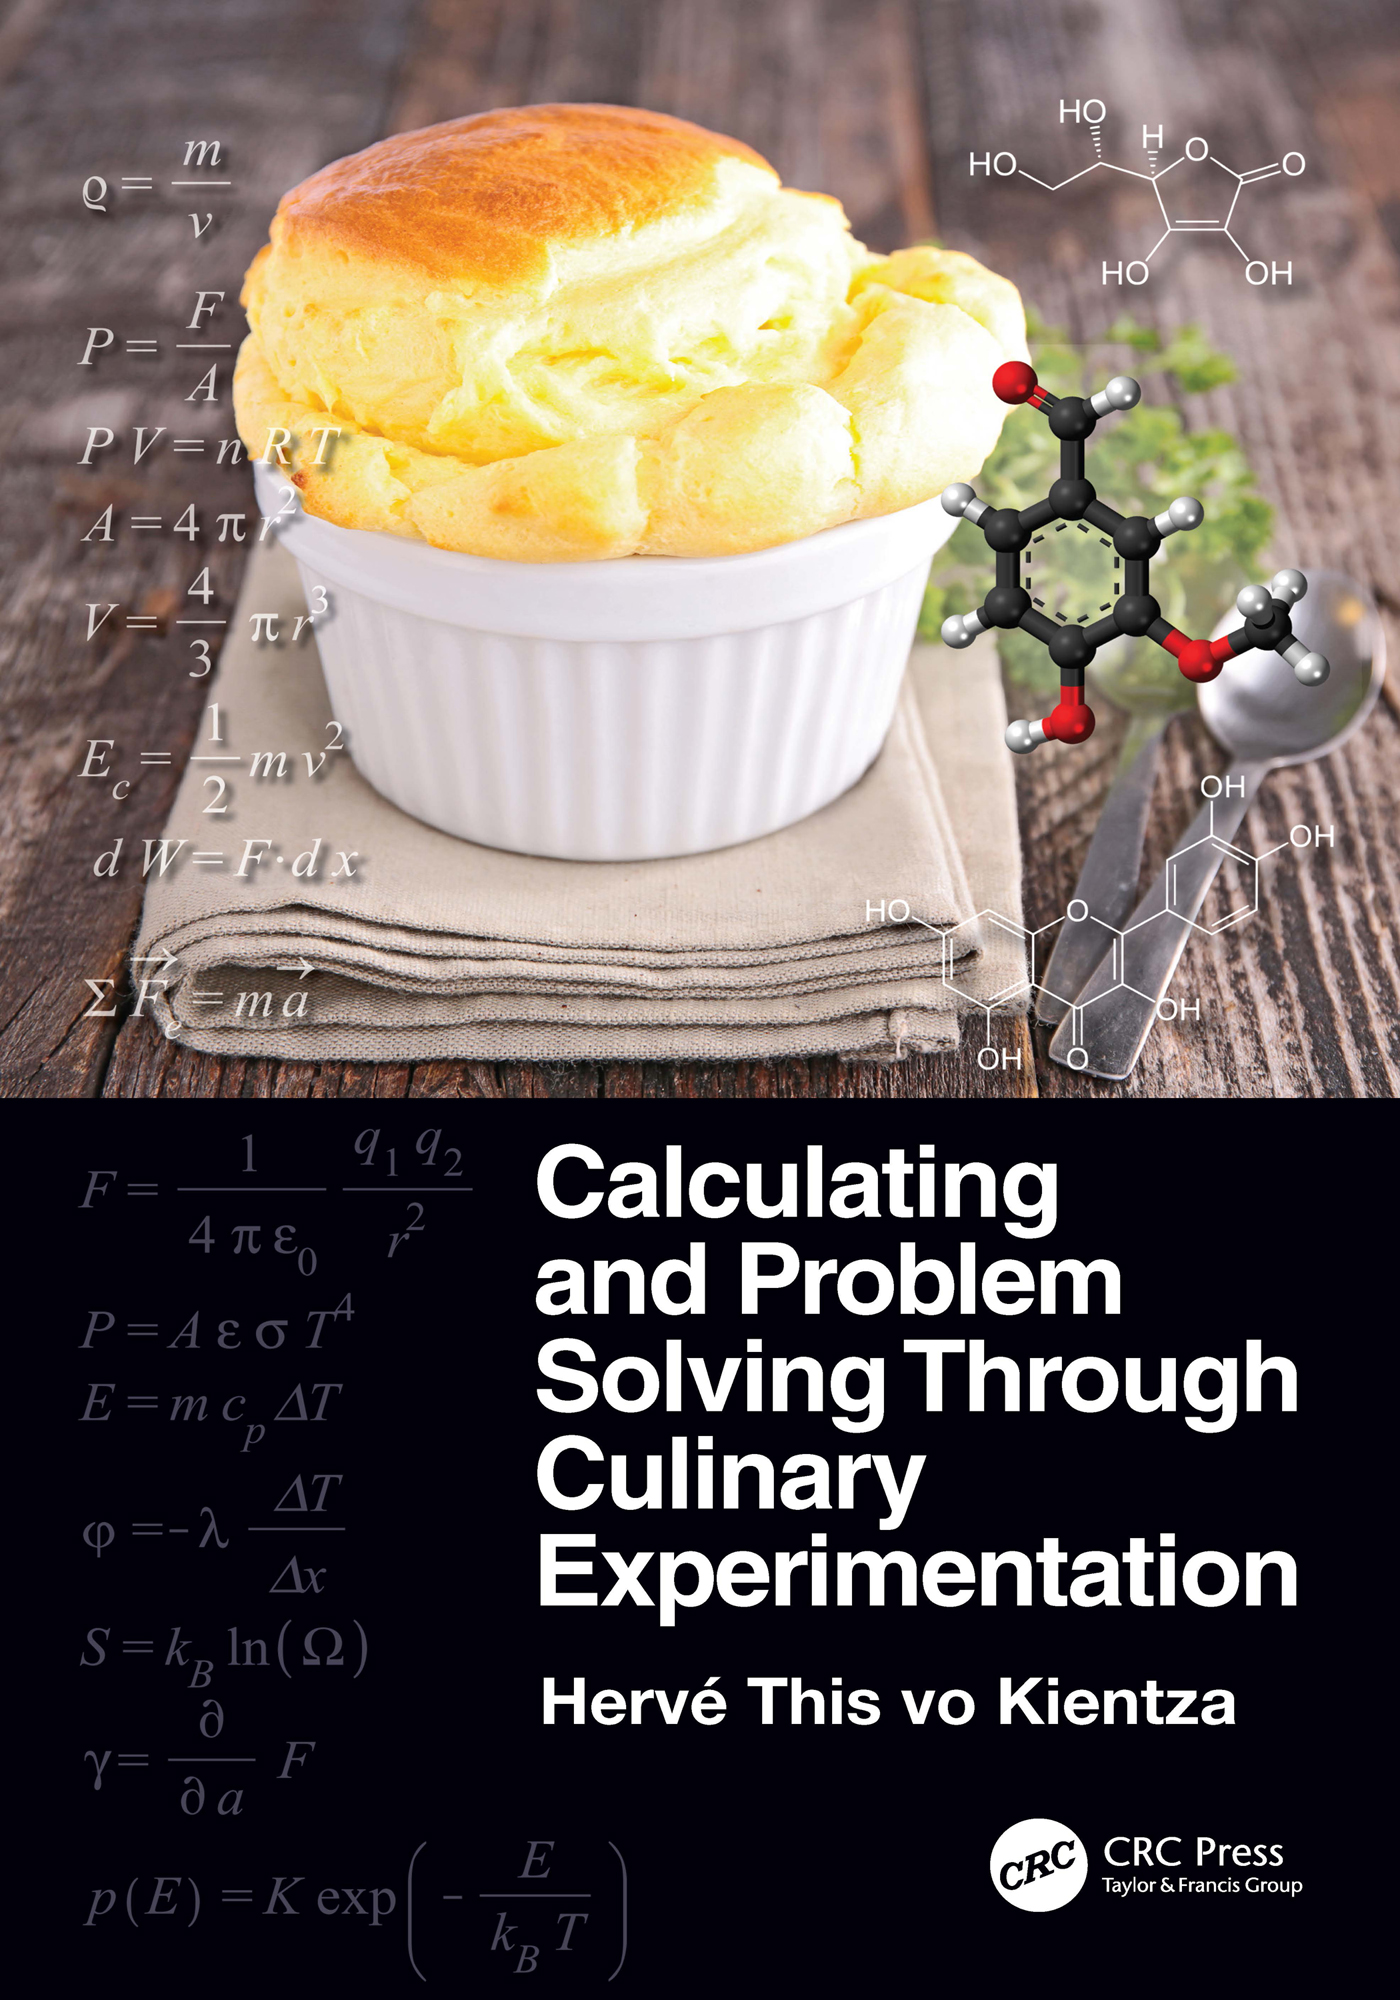 Calculating and Problem Solving Through Culinary Experimentation